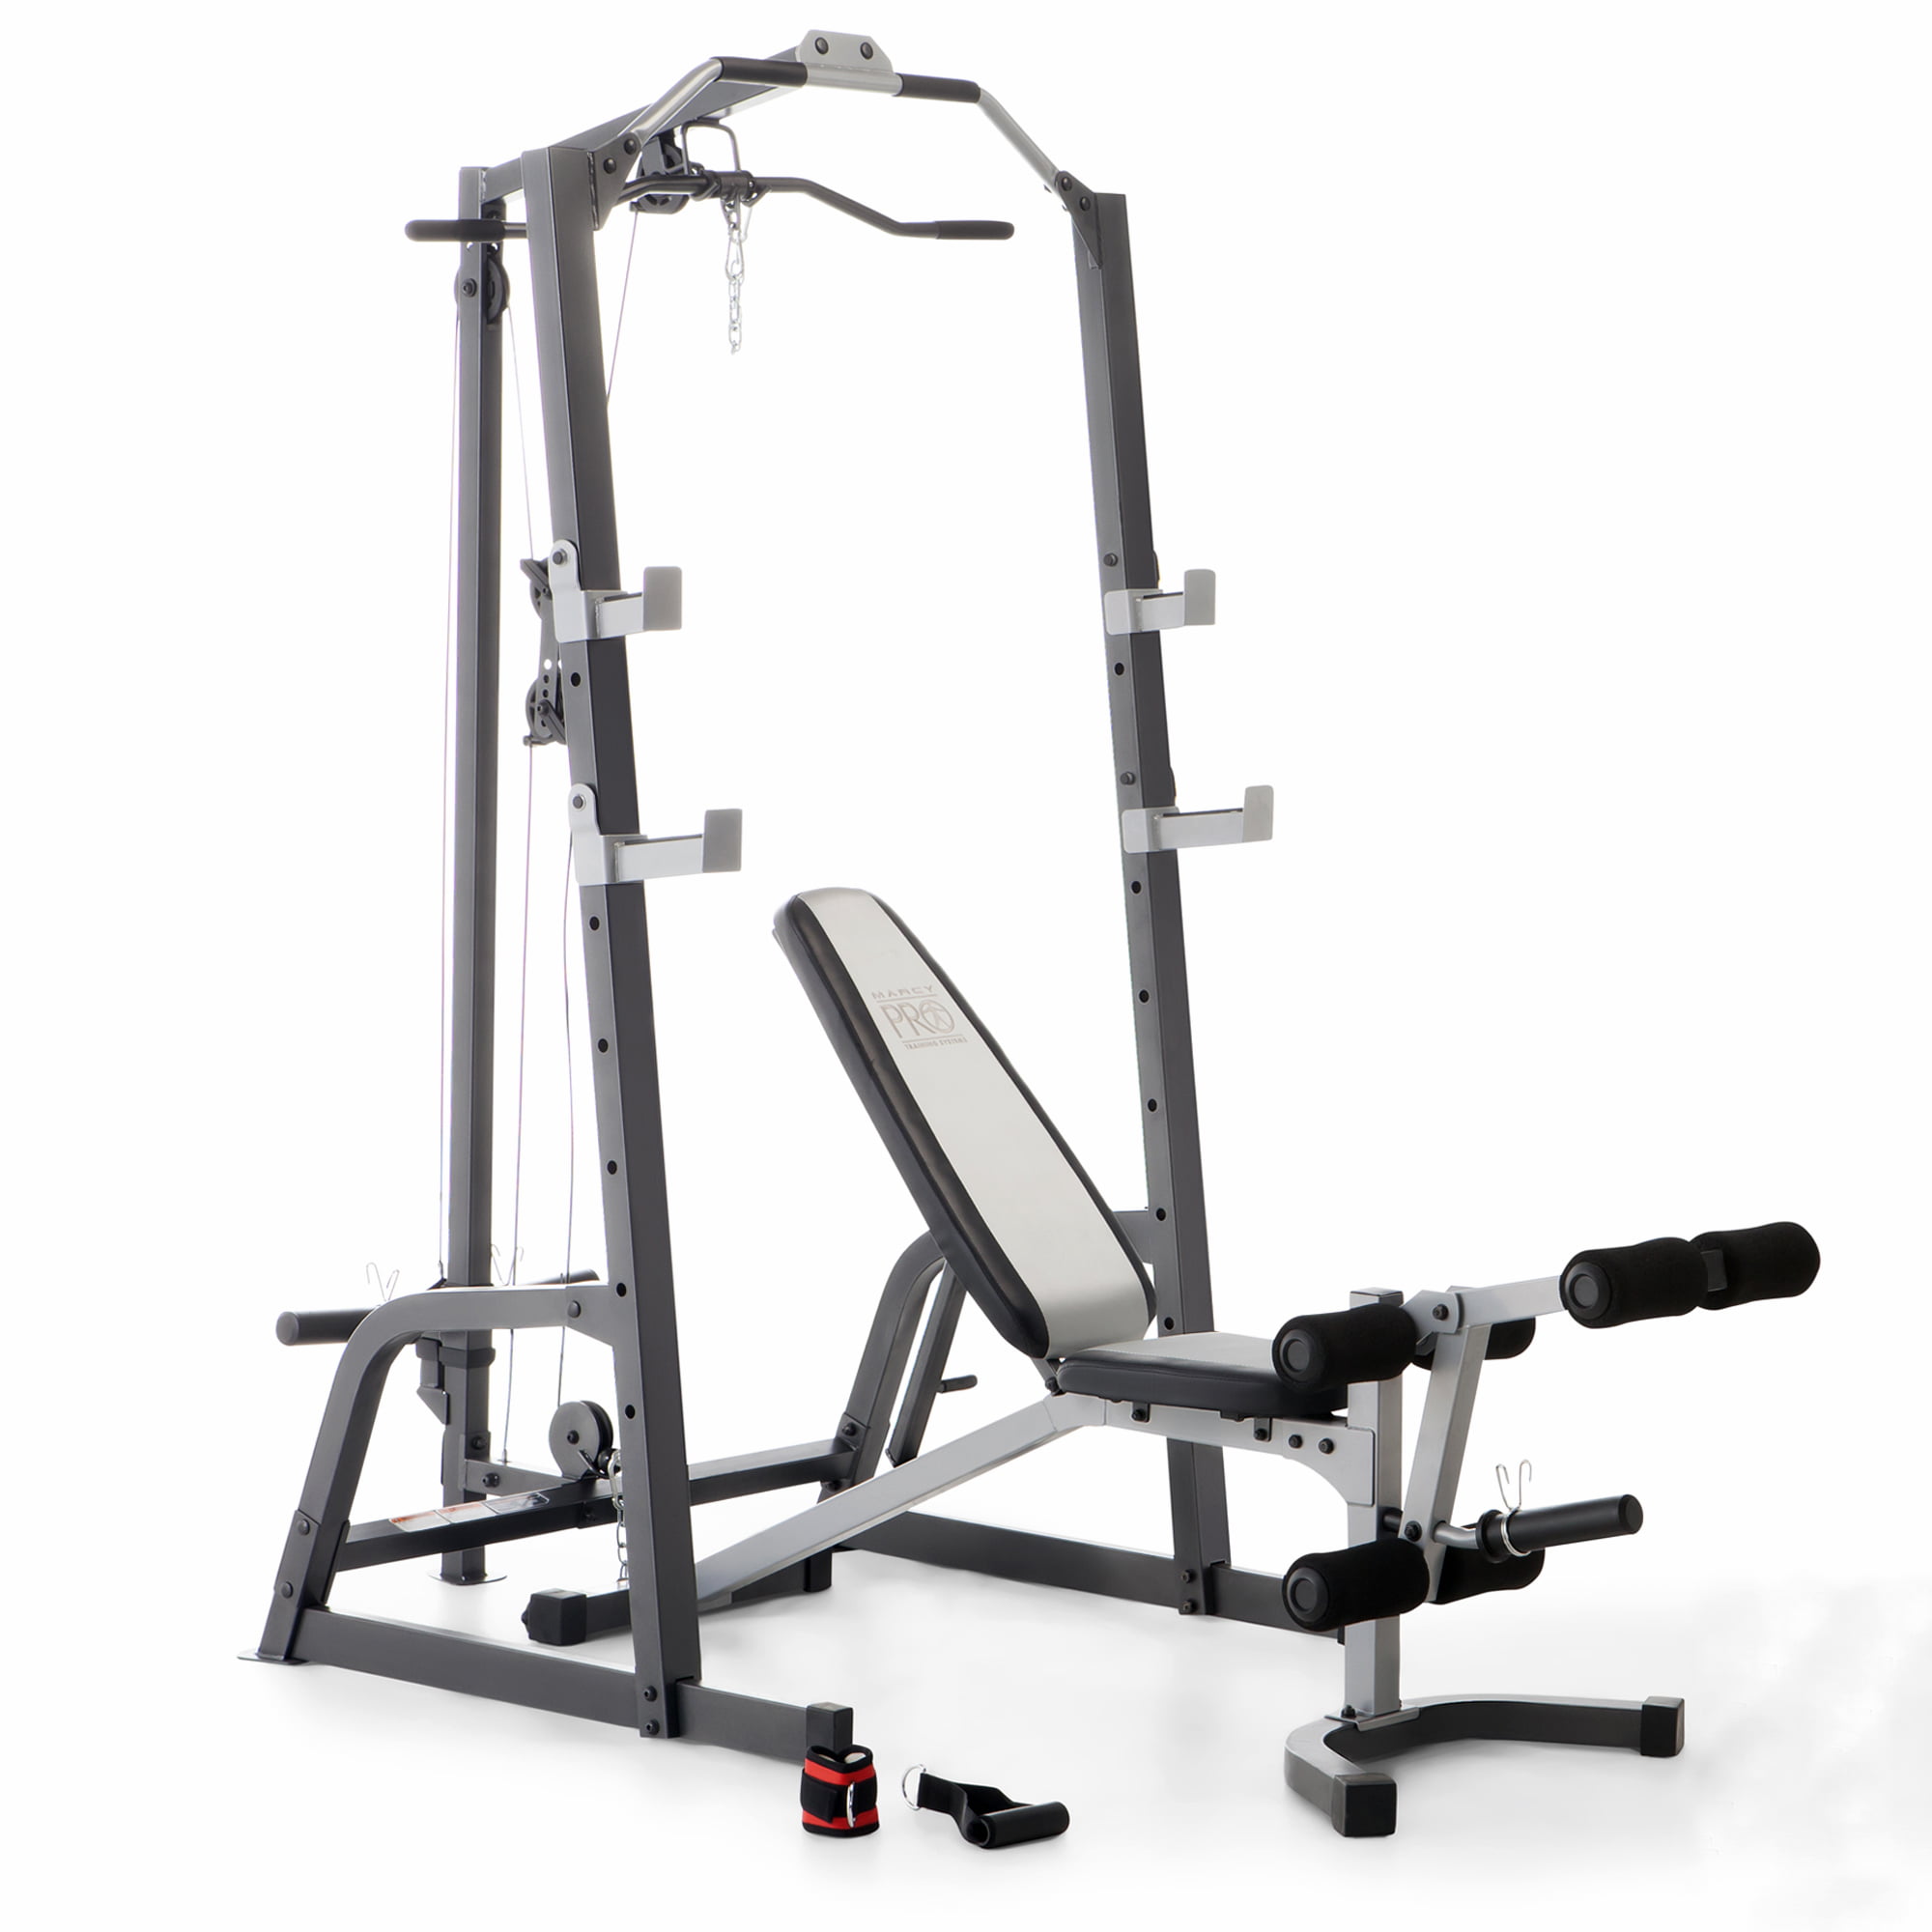 Details about   Power Rack Weight Lifting Squat Stand Strength Training Home Gym Power Cage 